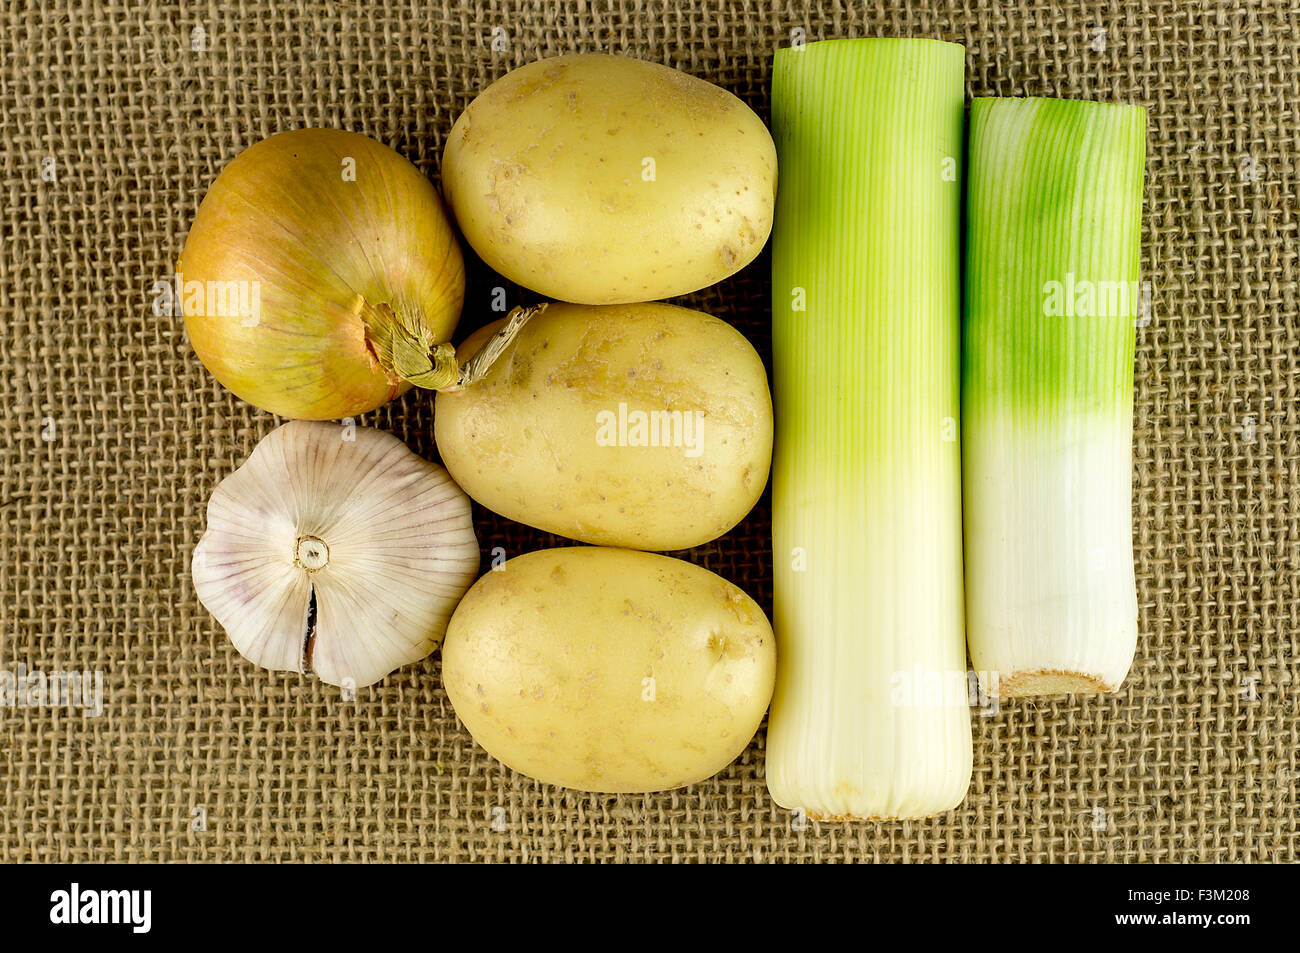 Aerial of leek, potato, garlic and onion ingredients for tasty soup Stock Photo